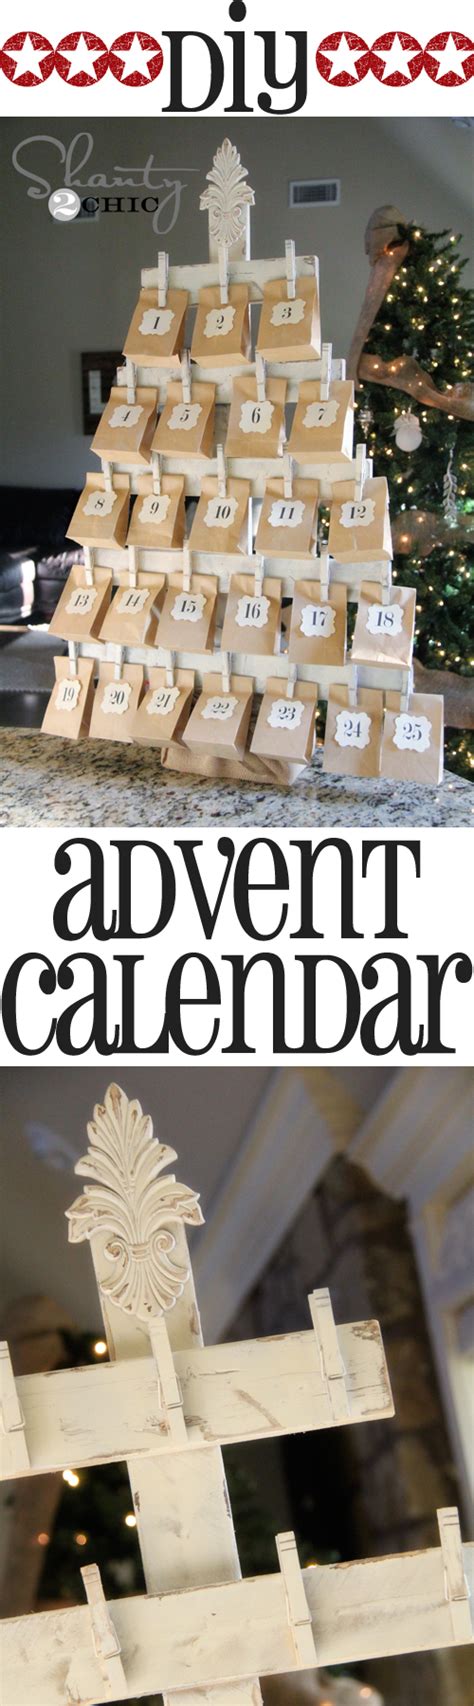 This game is a fun activity for the kids. 15+ Christmas Advent Calendar Ideas - The Organised Housewife